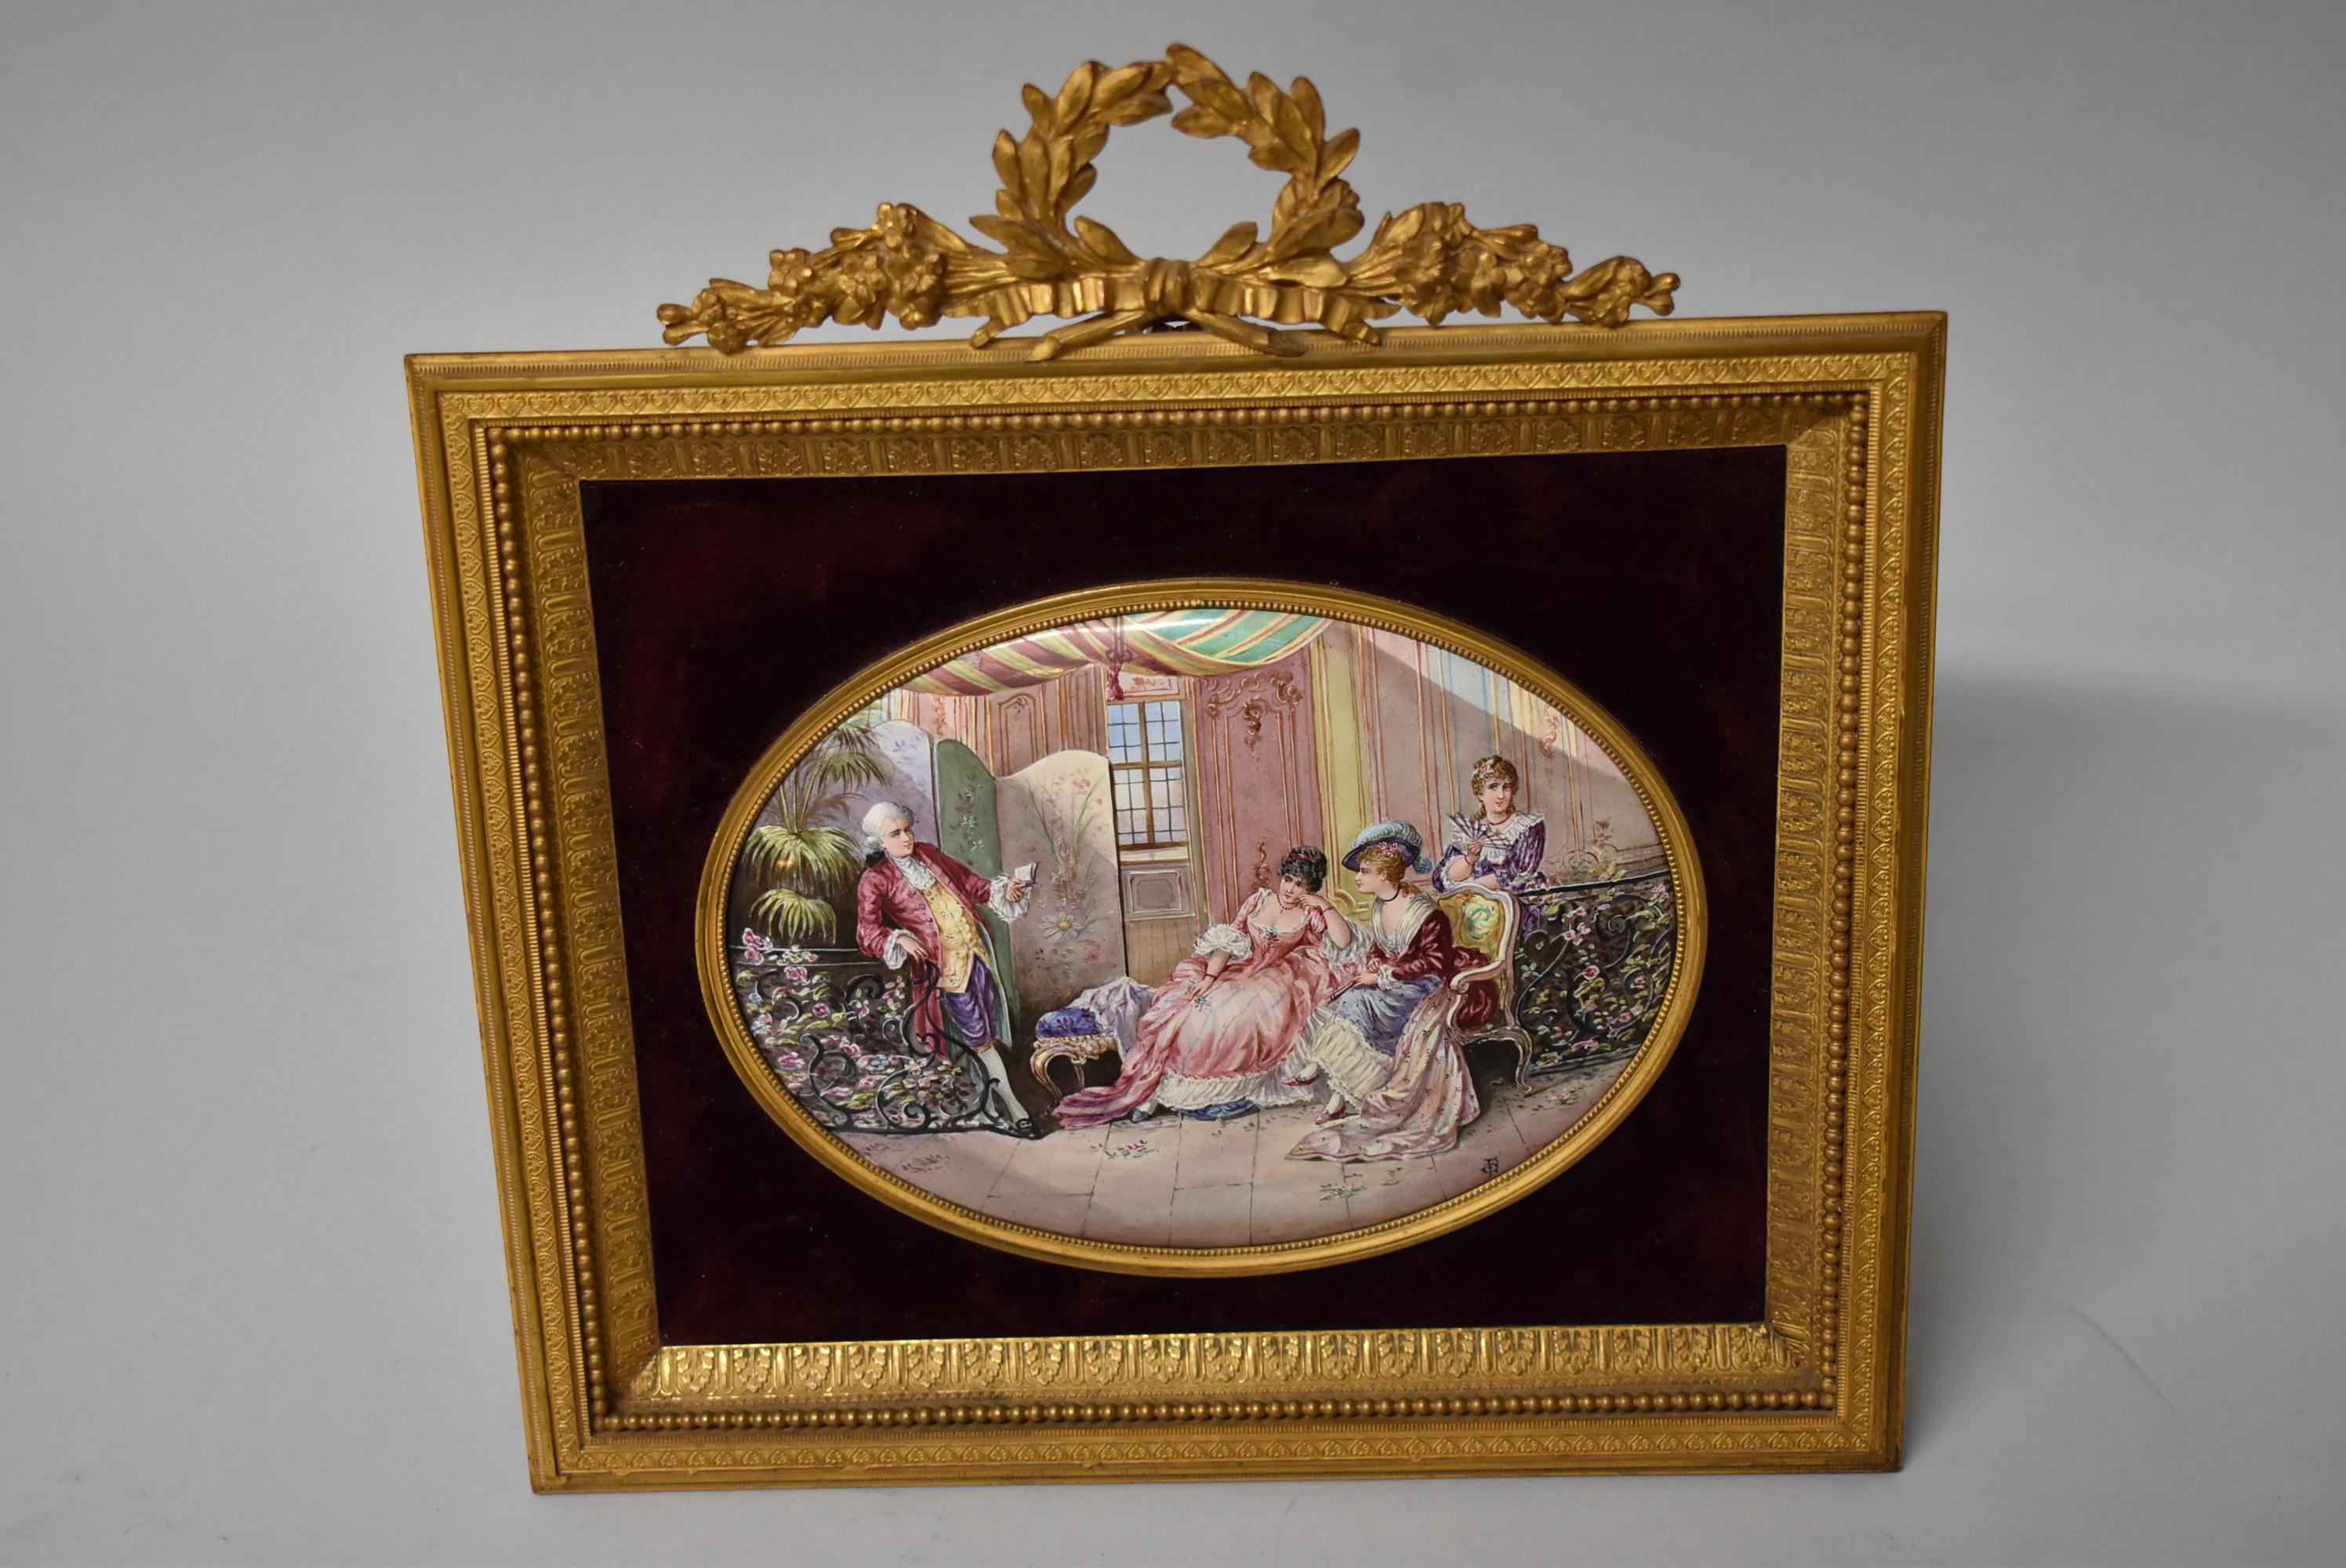 Antique French oval miniature painting on porcelain. Thee ladies and a gentleman gathering in a parlor. Very nice to excellent condition. Fabric on the back is worn.  Image measures 5.5